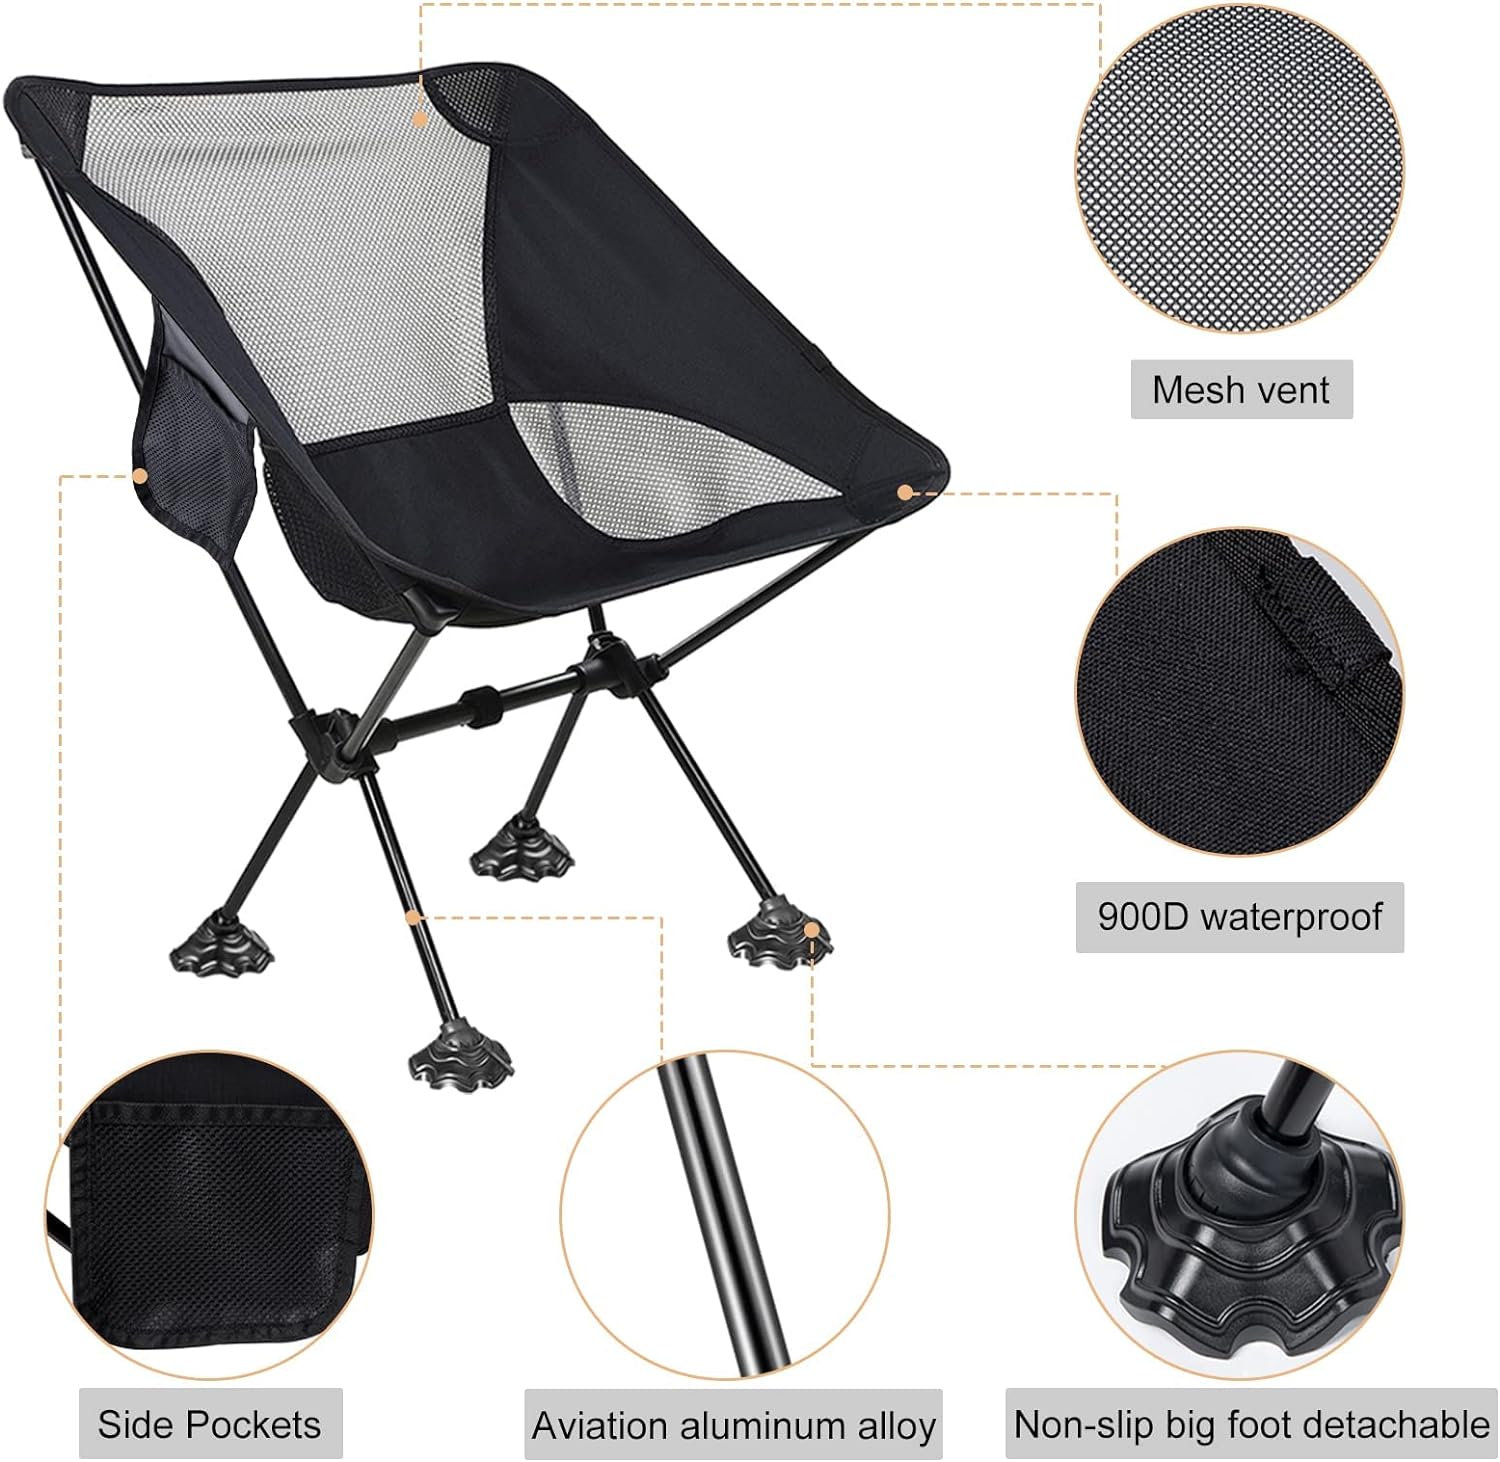 Portable Camping Chair Backpacking Chair With Anti-Slip Large Feet And Carry Bag For Outdoor Camp Hiking Capacity 220 Lbs